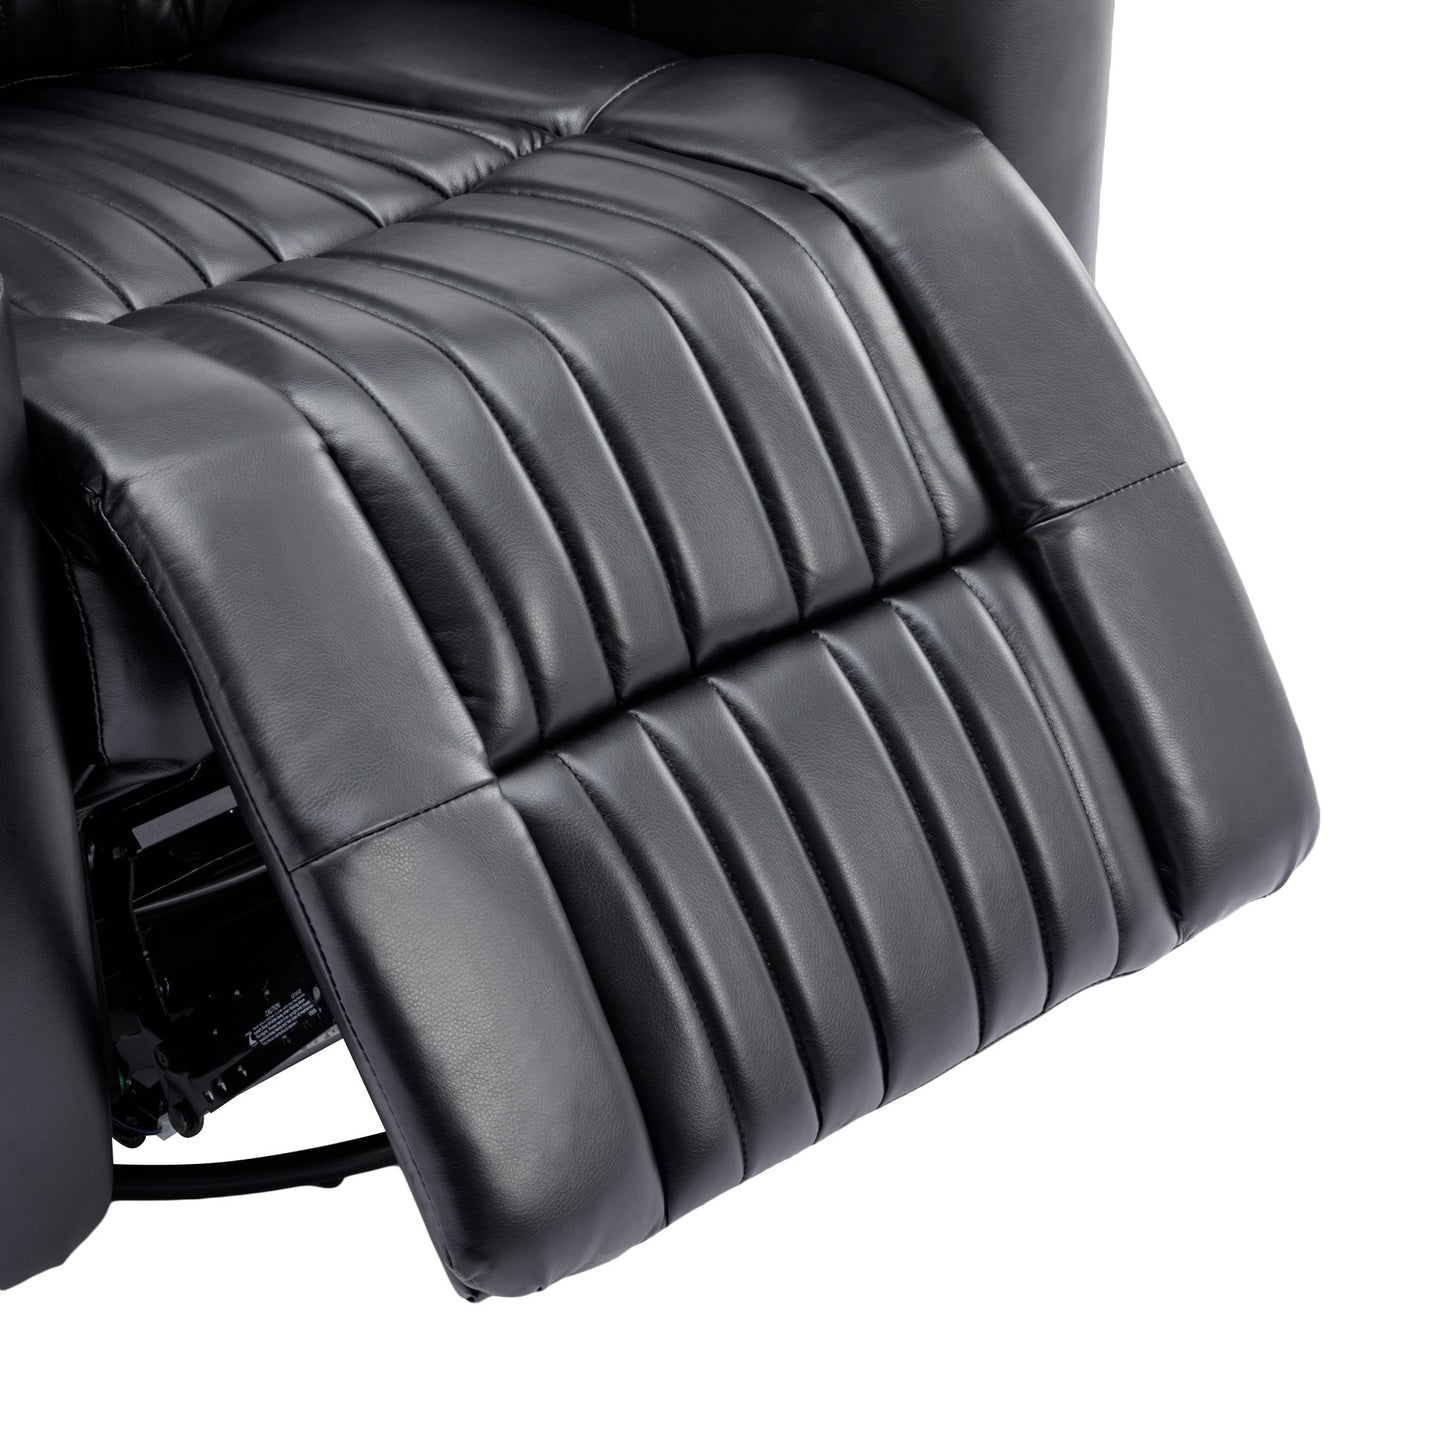 1st Choice 270° Power Swivel Home Recliner Seating With Hidden Arm Storage